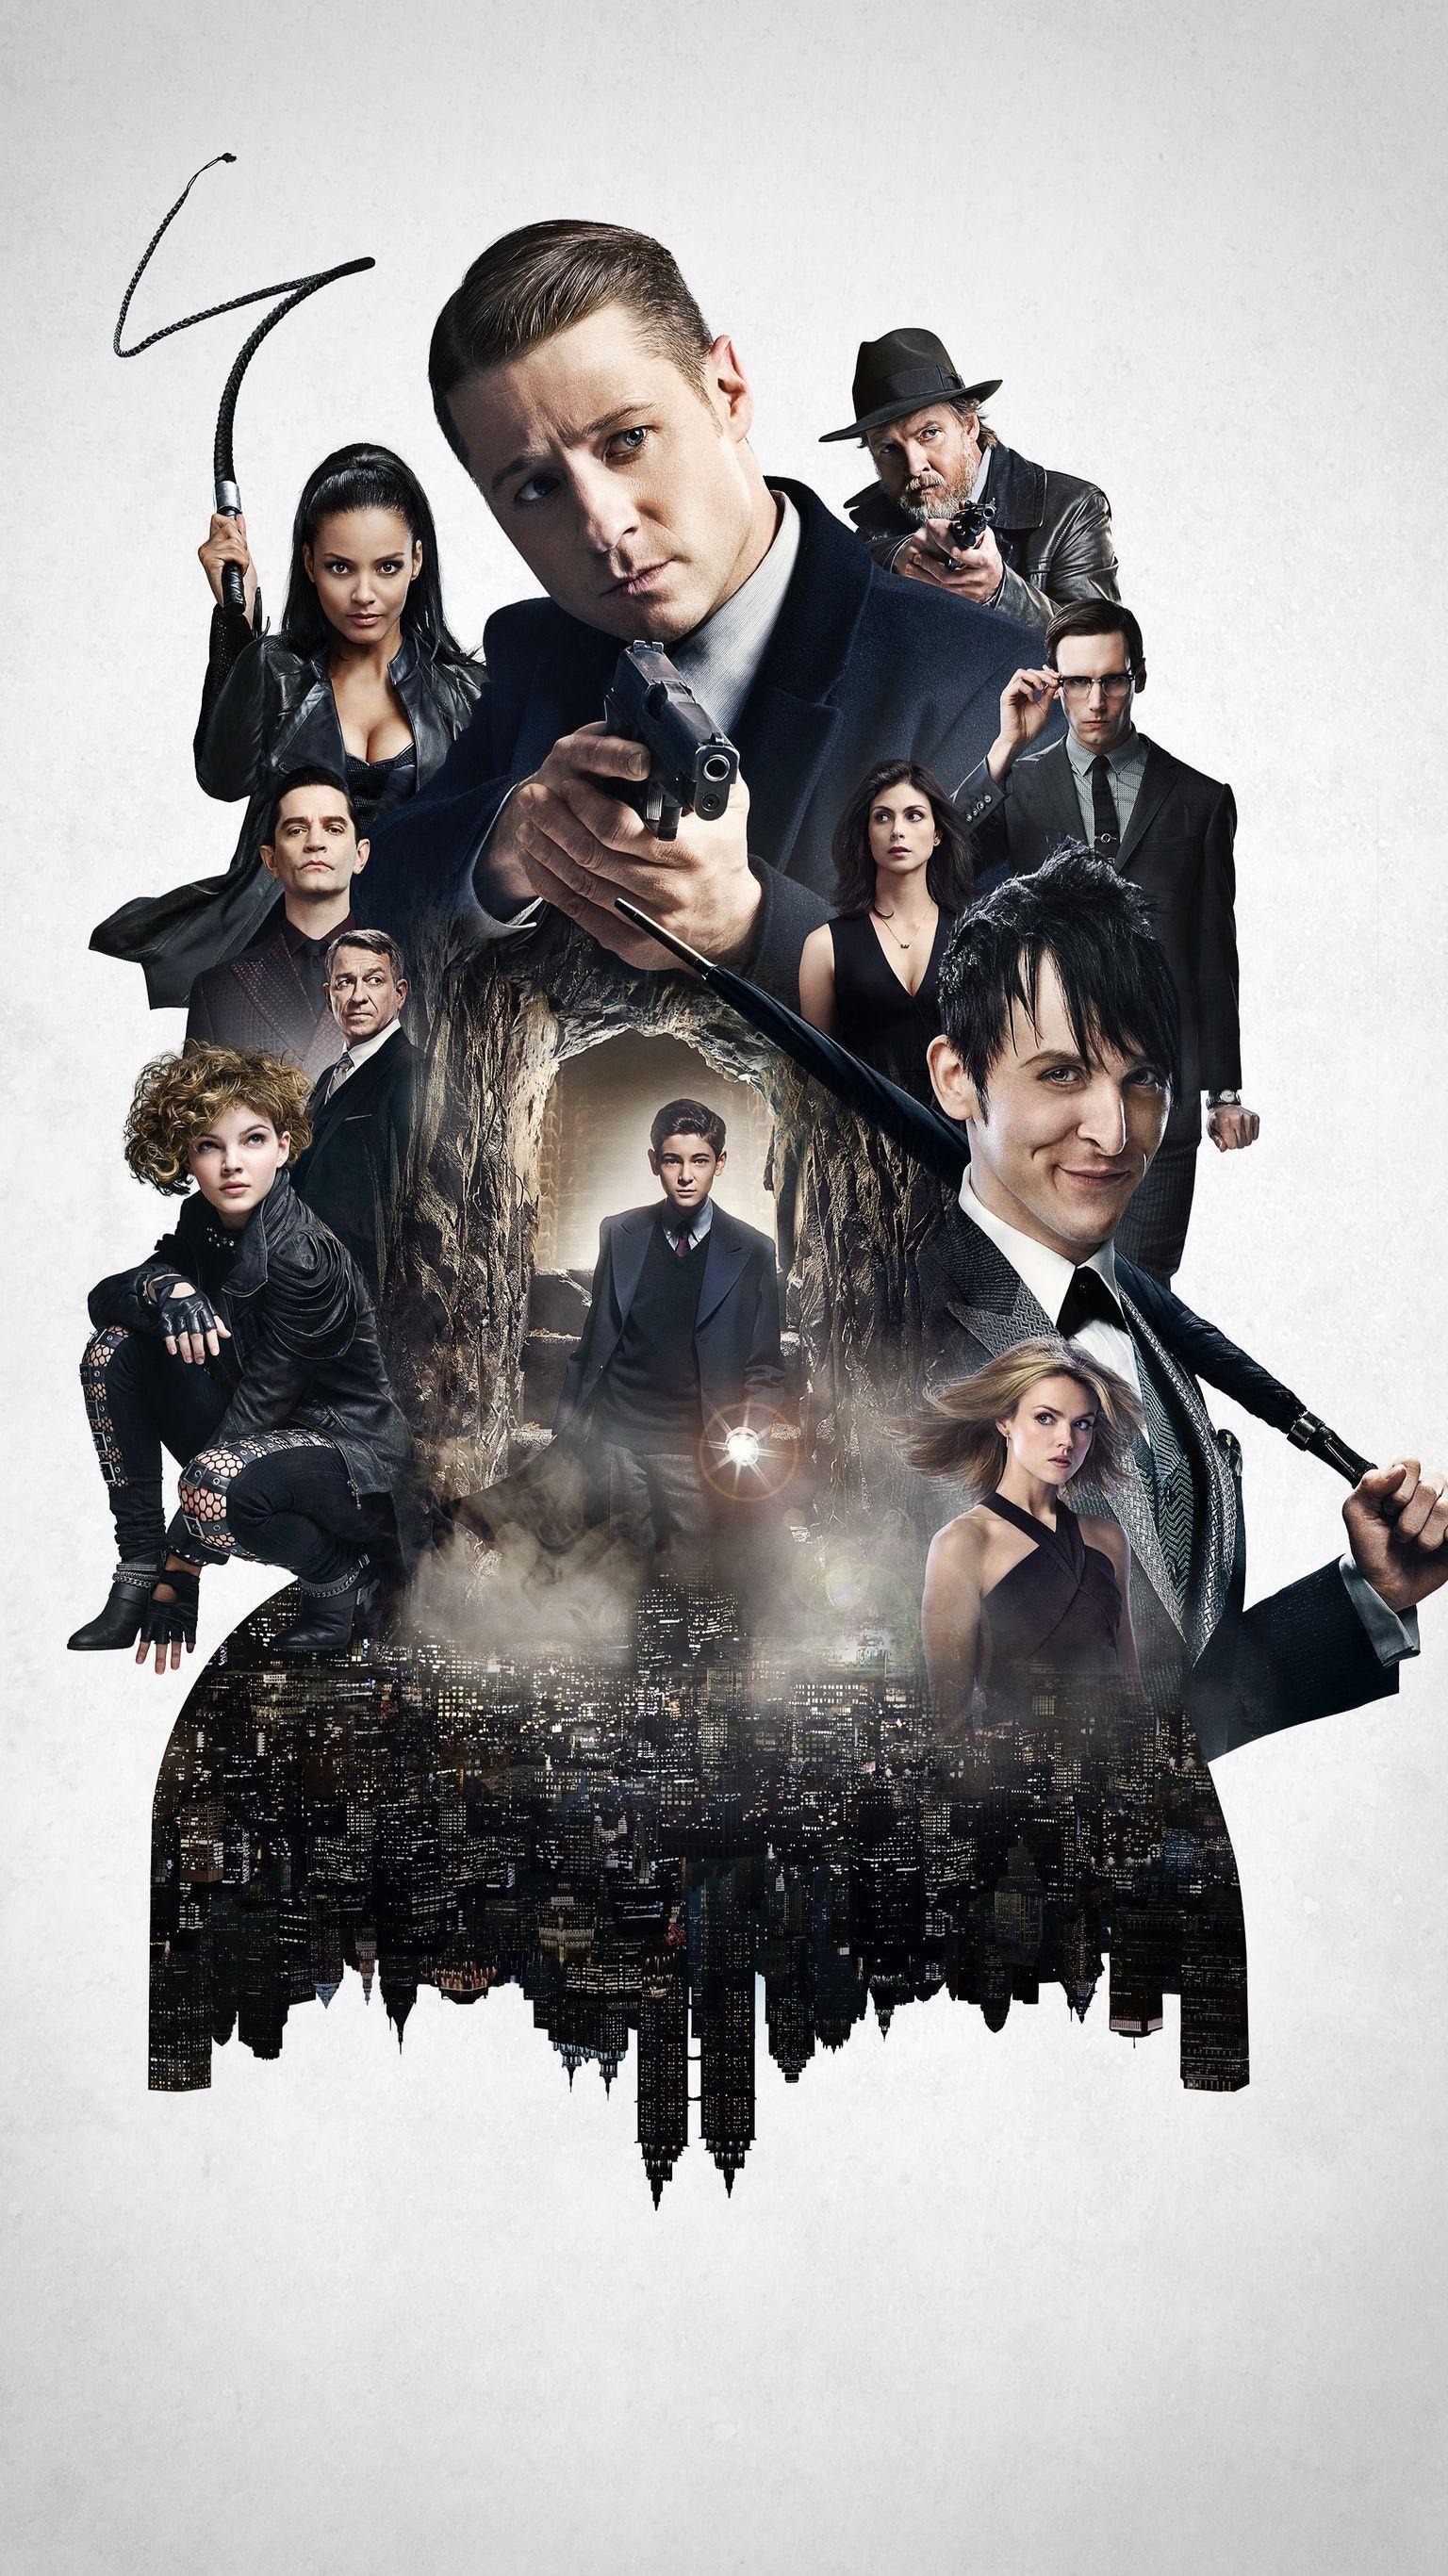 gotham tv series free download for mobile